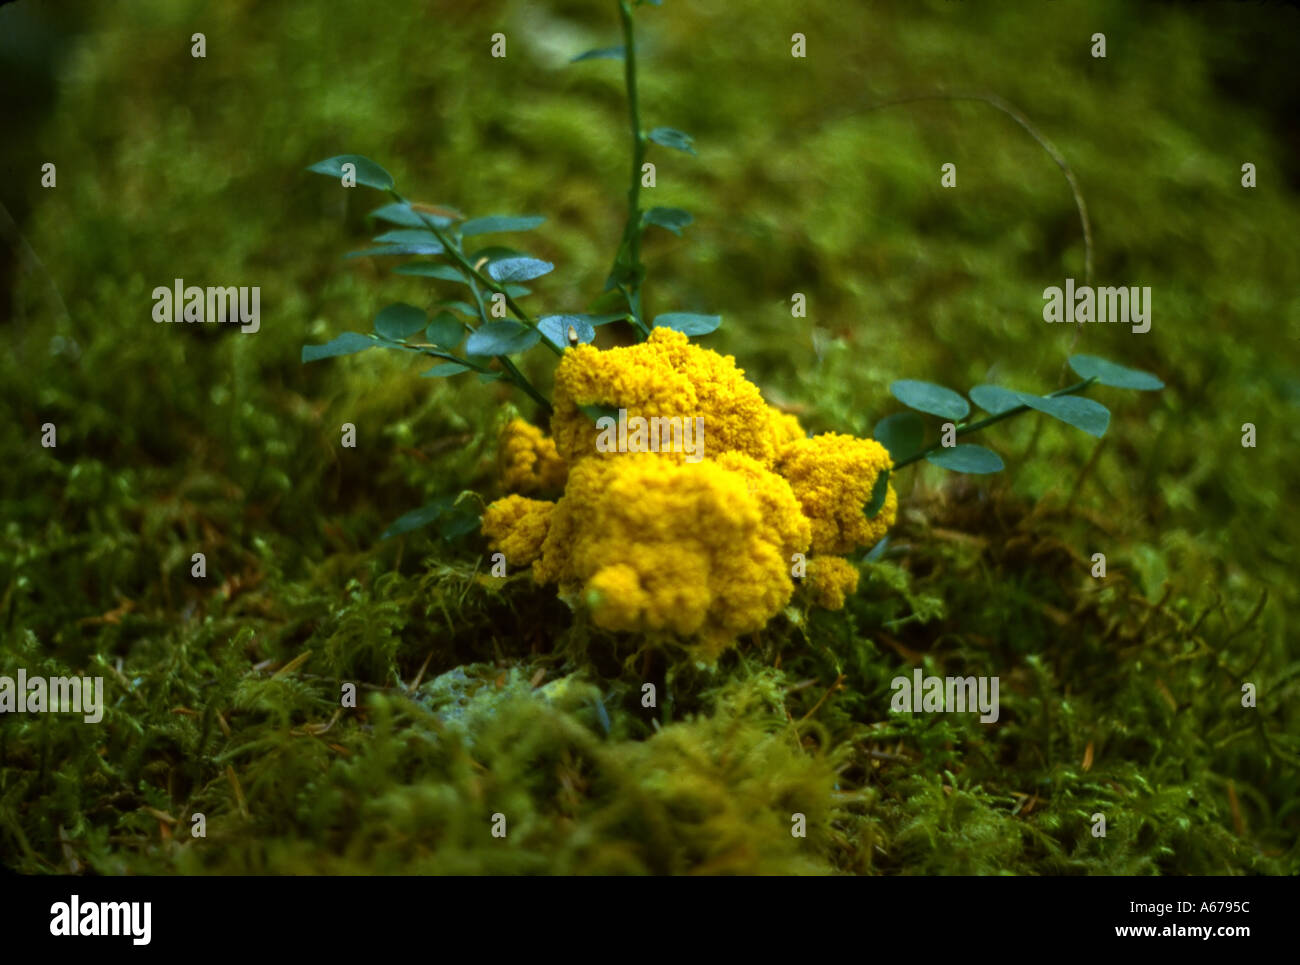 A slime mold, likely Physarum polycephalum, on the forest floor of a wooded park in Portland, Oregon USA Stock Photo